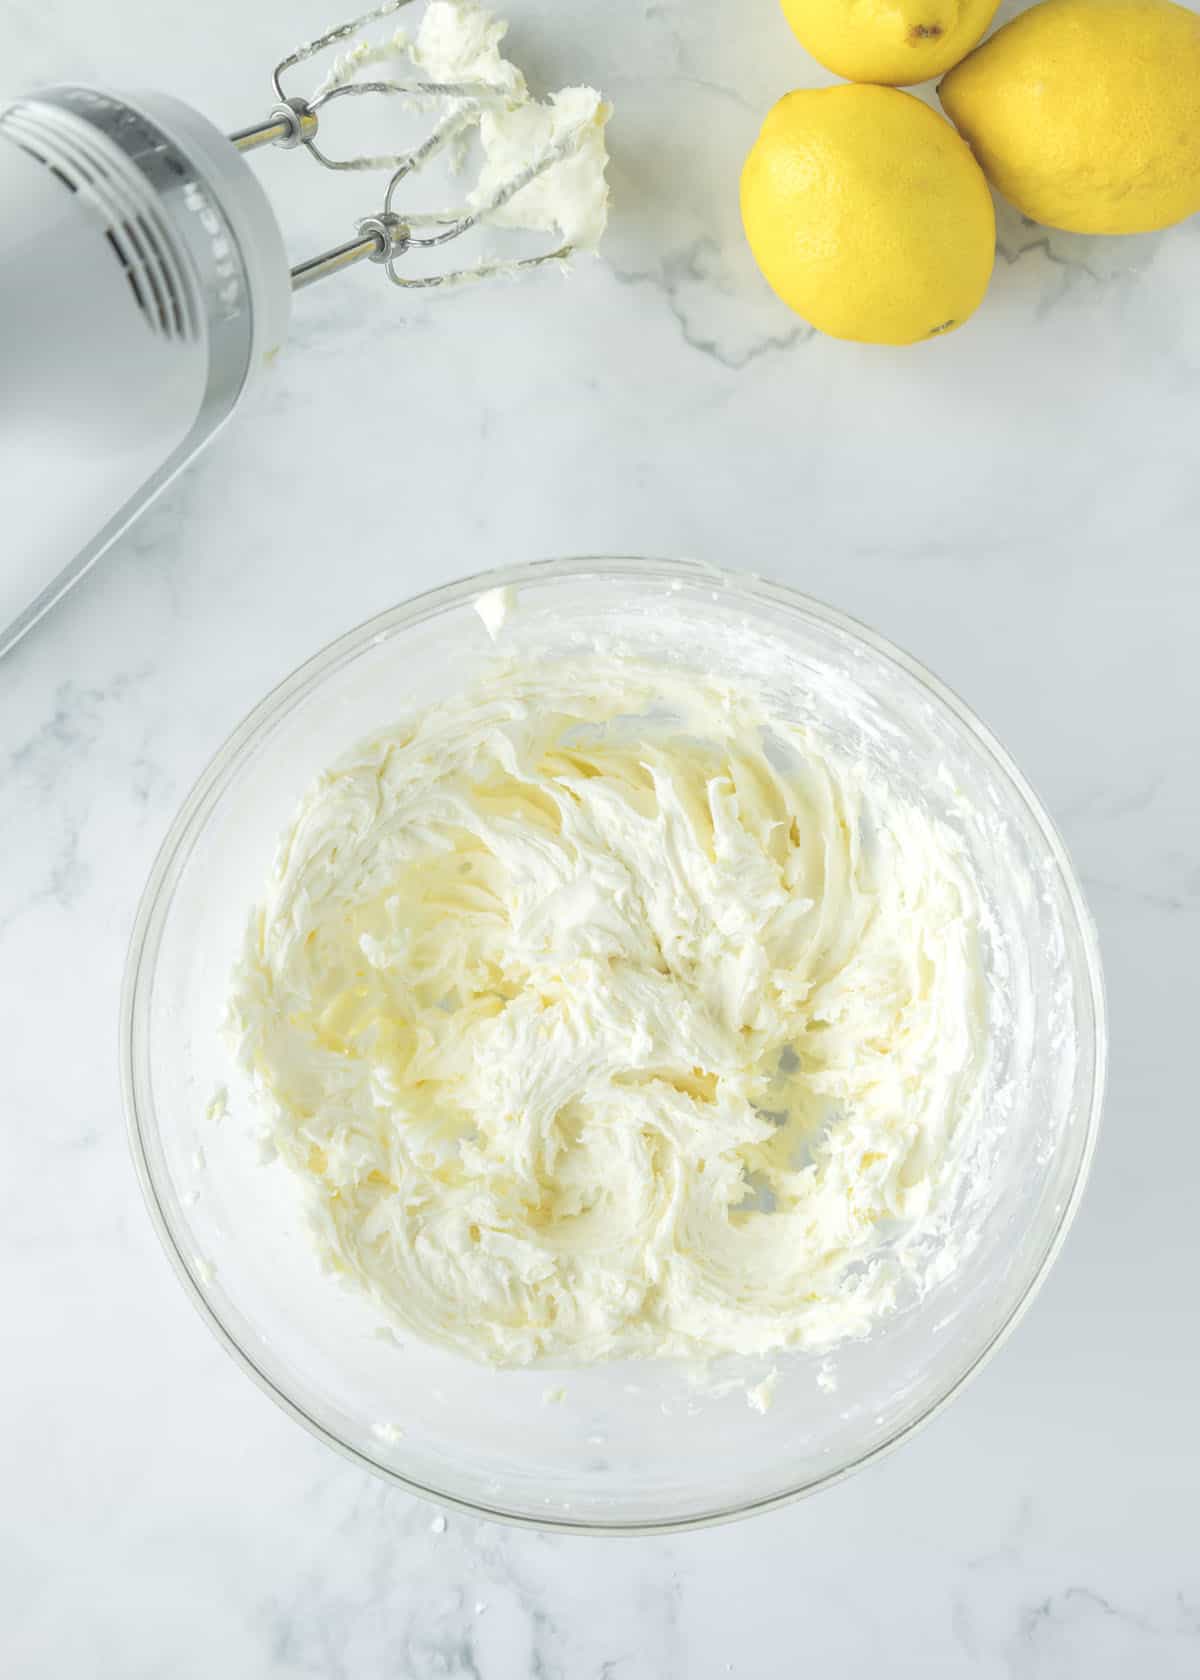 Heavy cream is added to the powdered sugar, lemon zest, butter, and vanilla extract mixture.